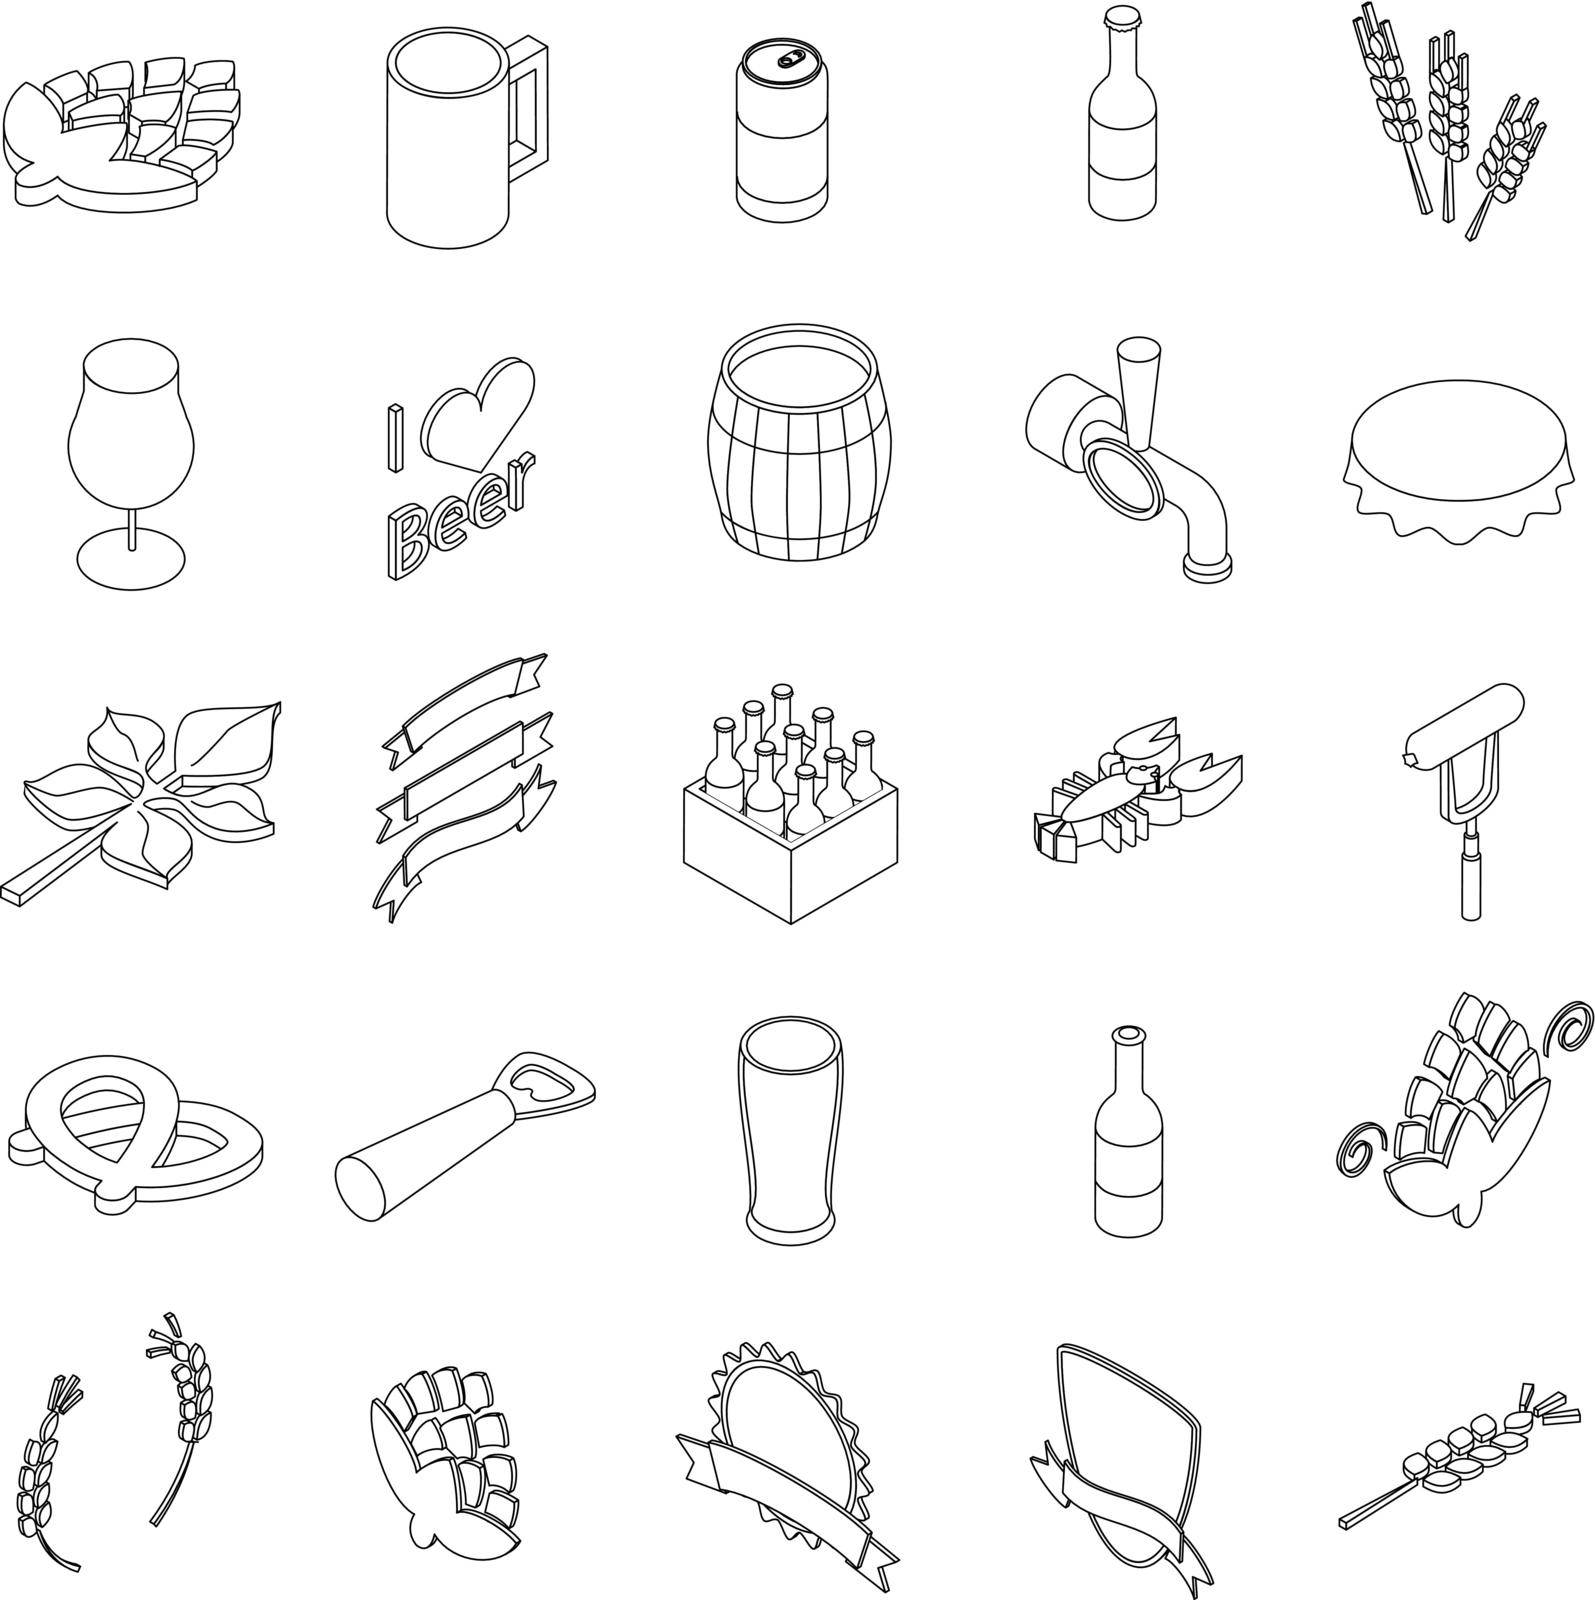 Beer set icons by ylivdesign